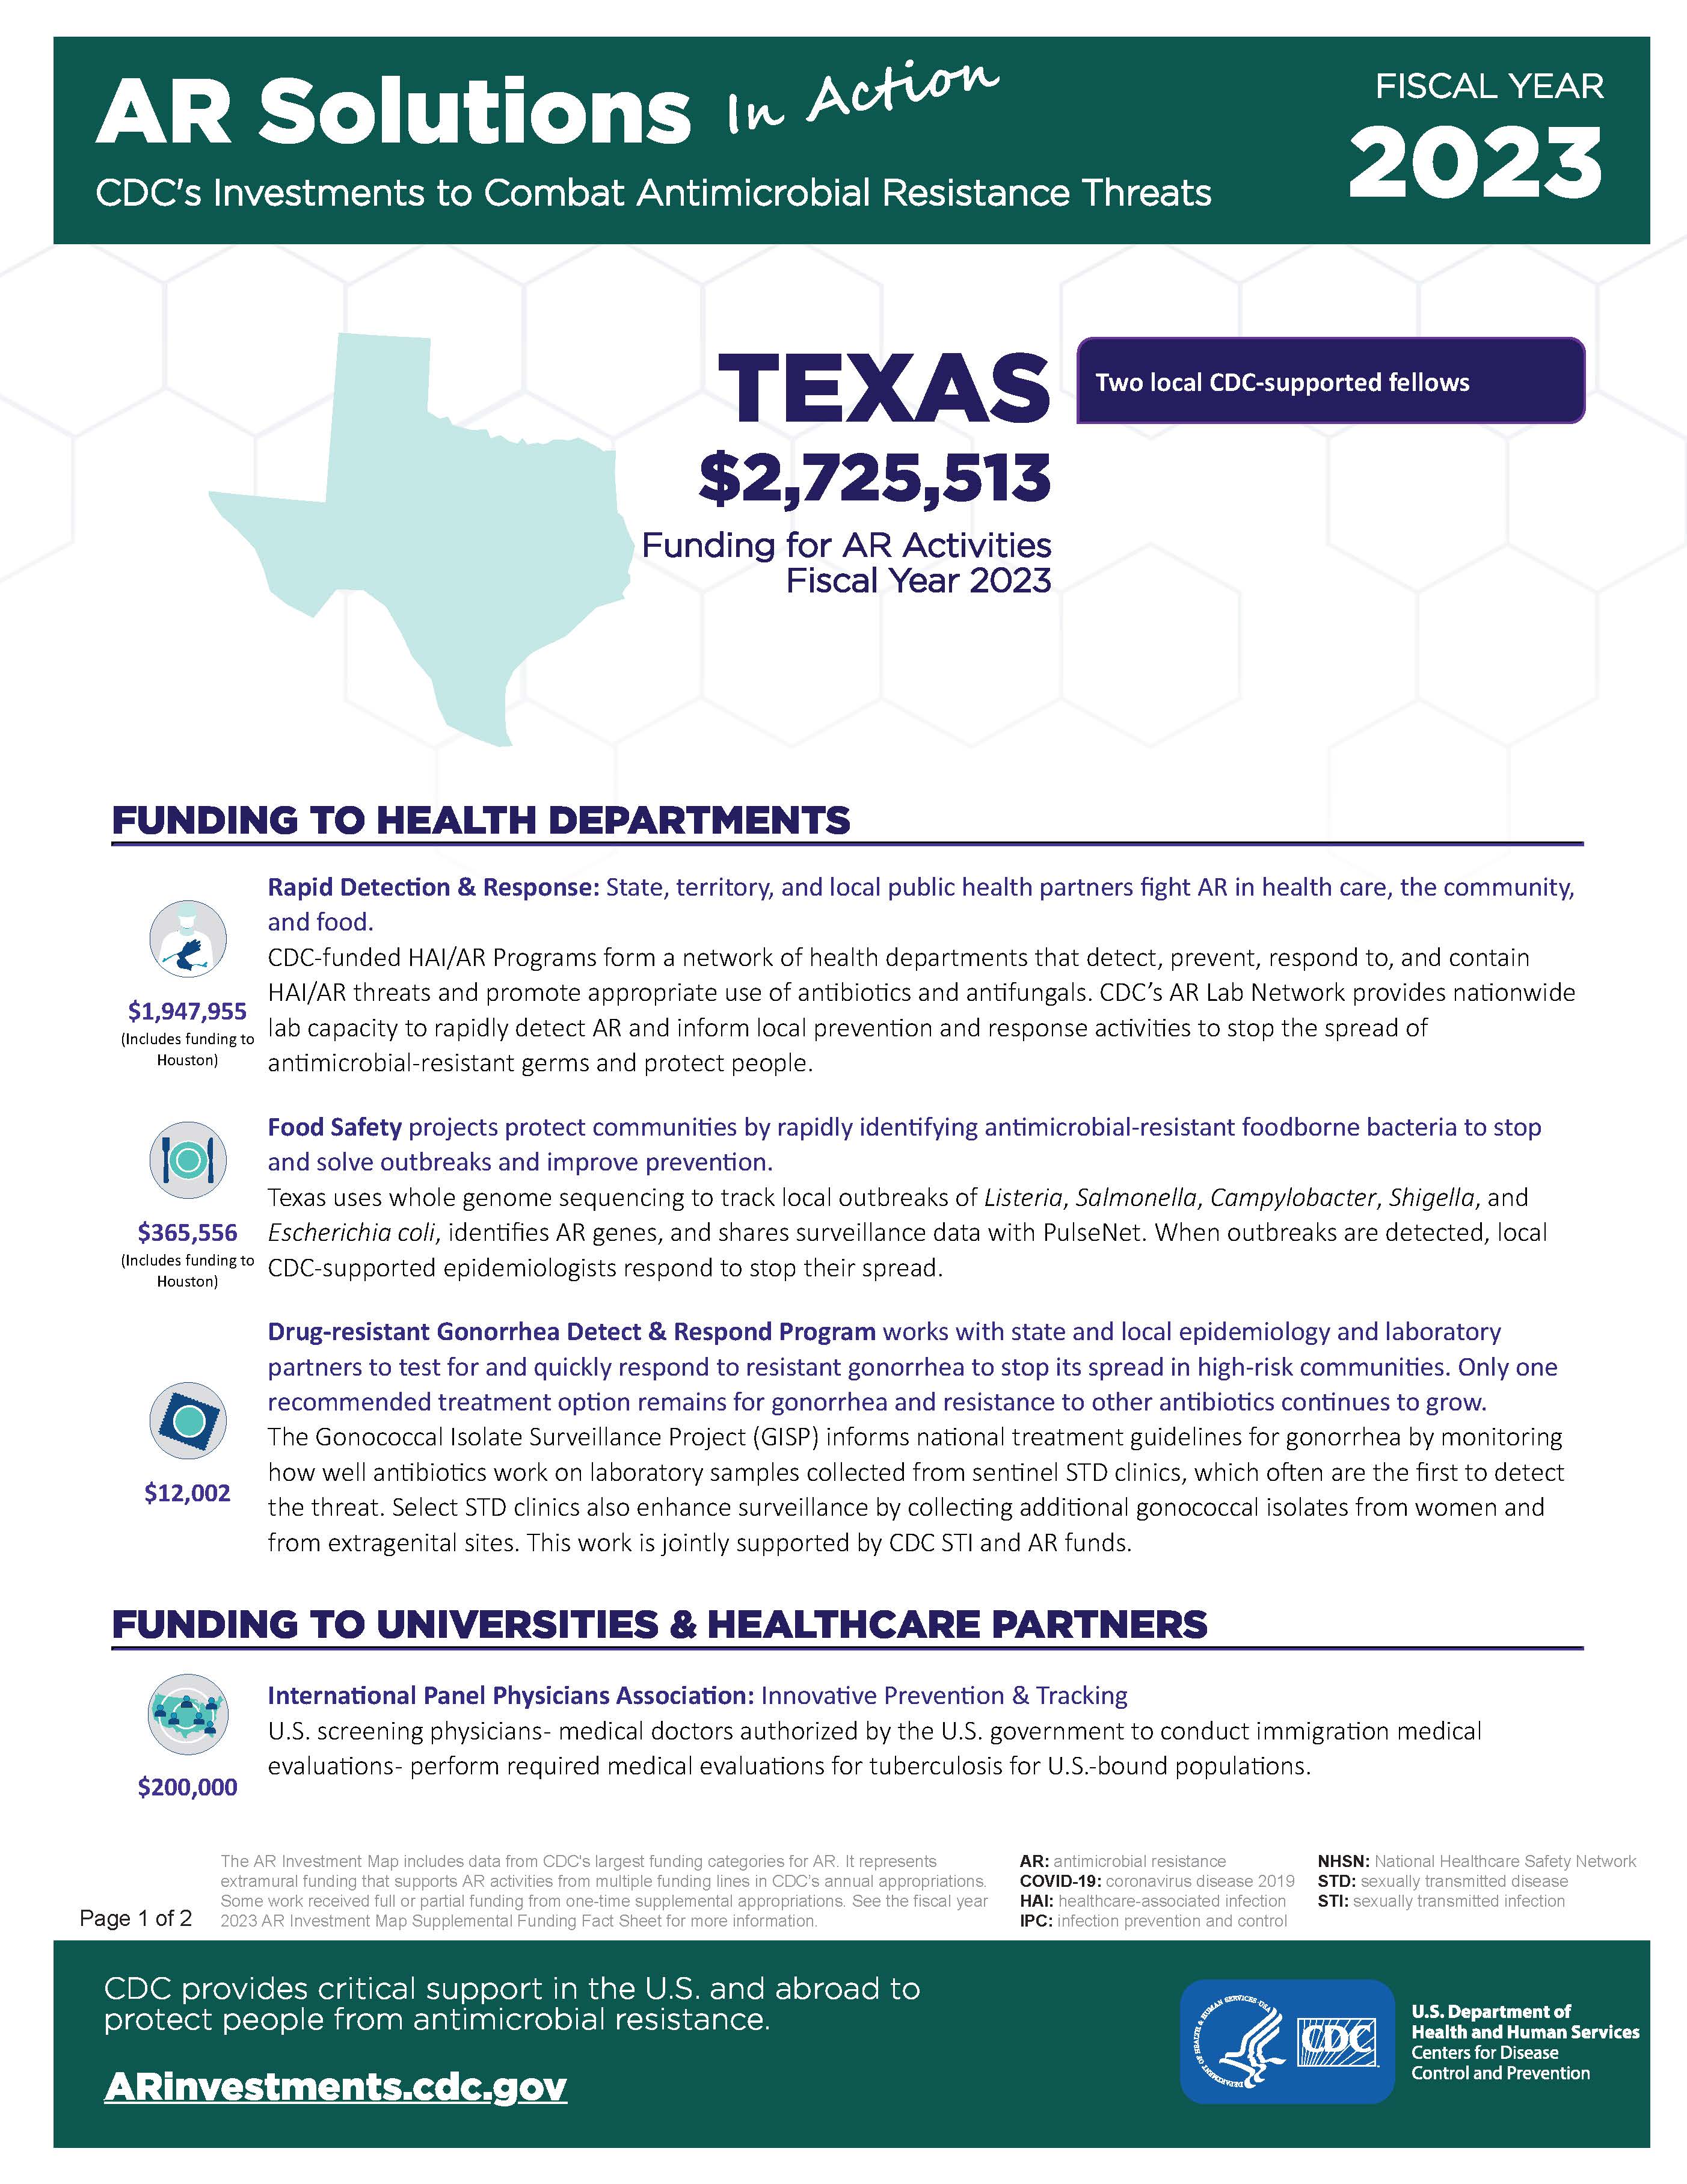 View Factsheet for Texas